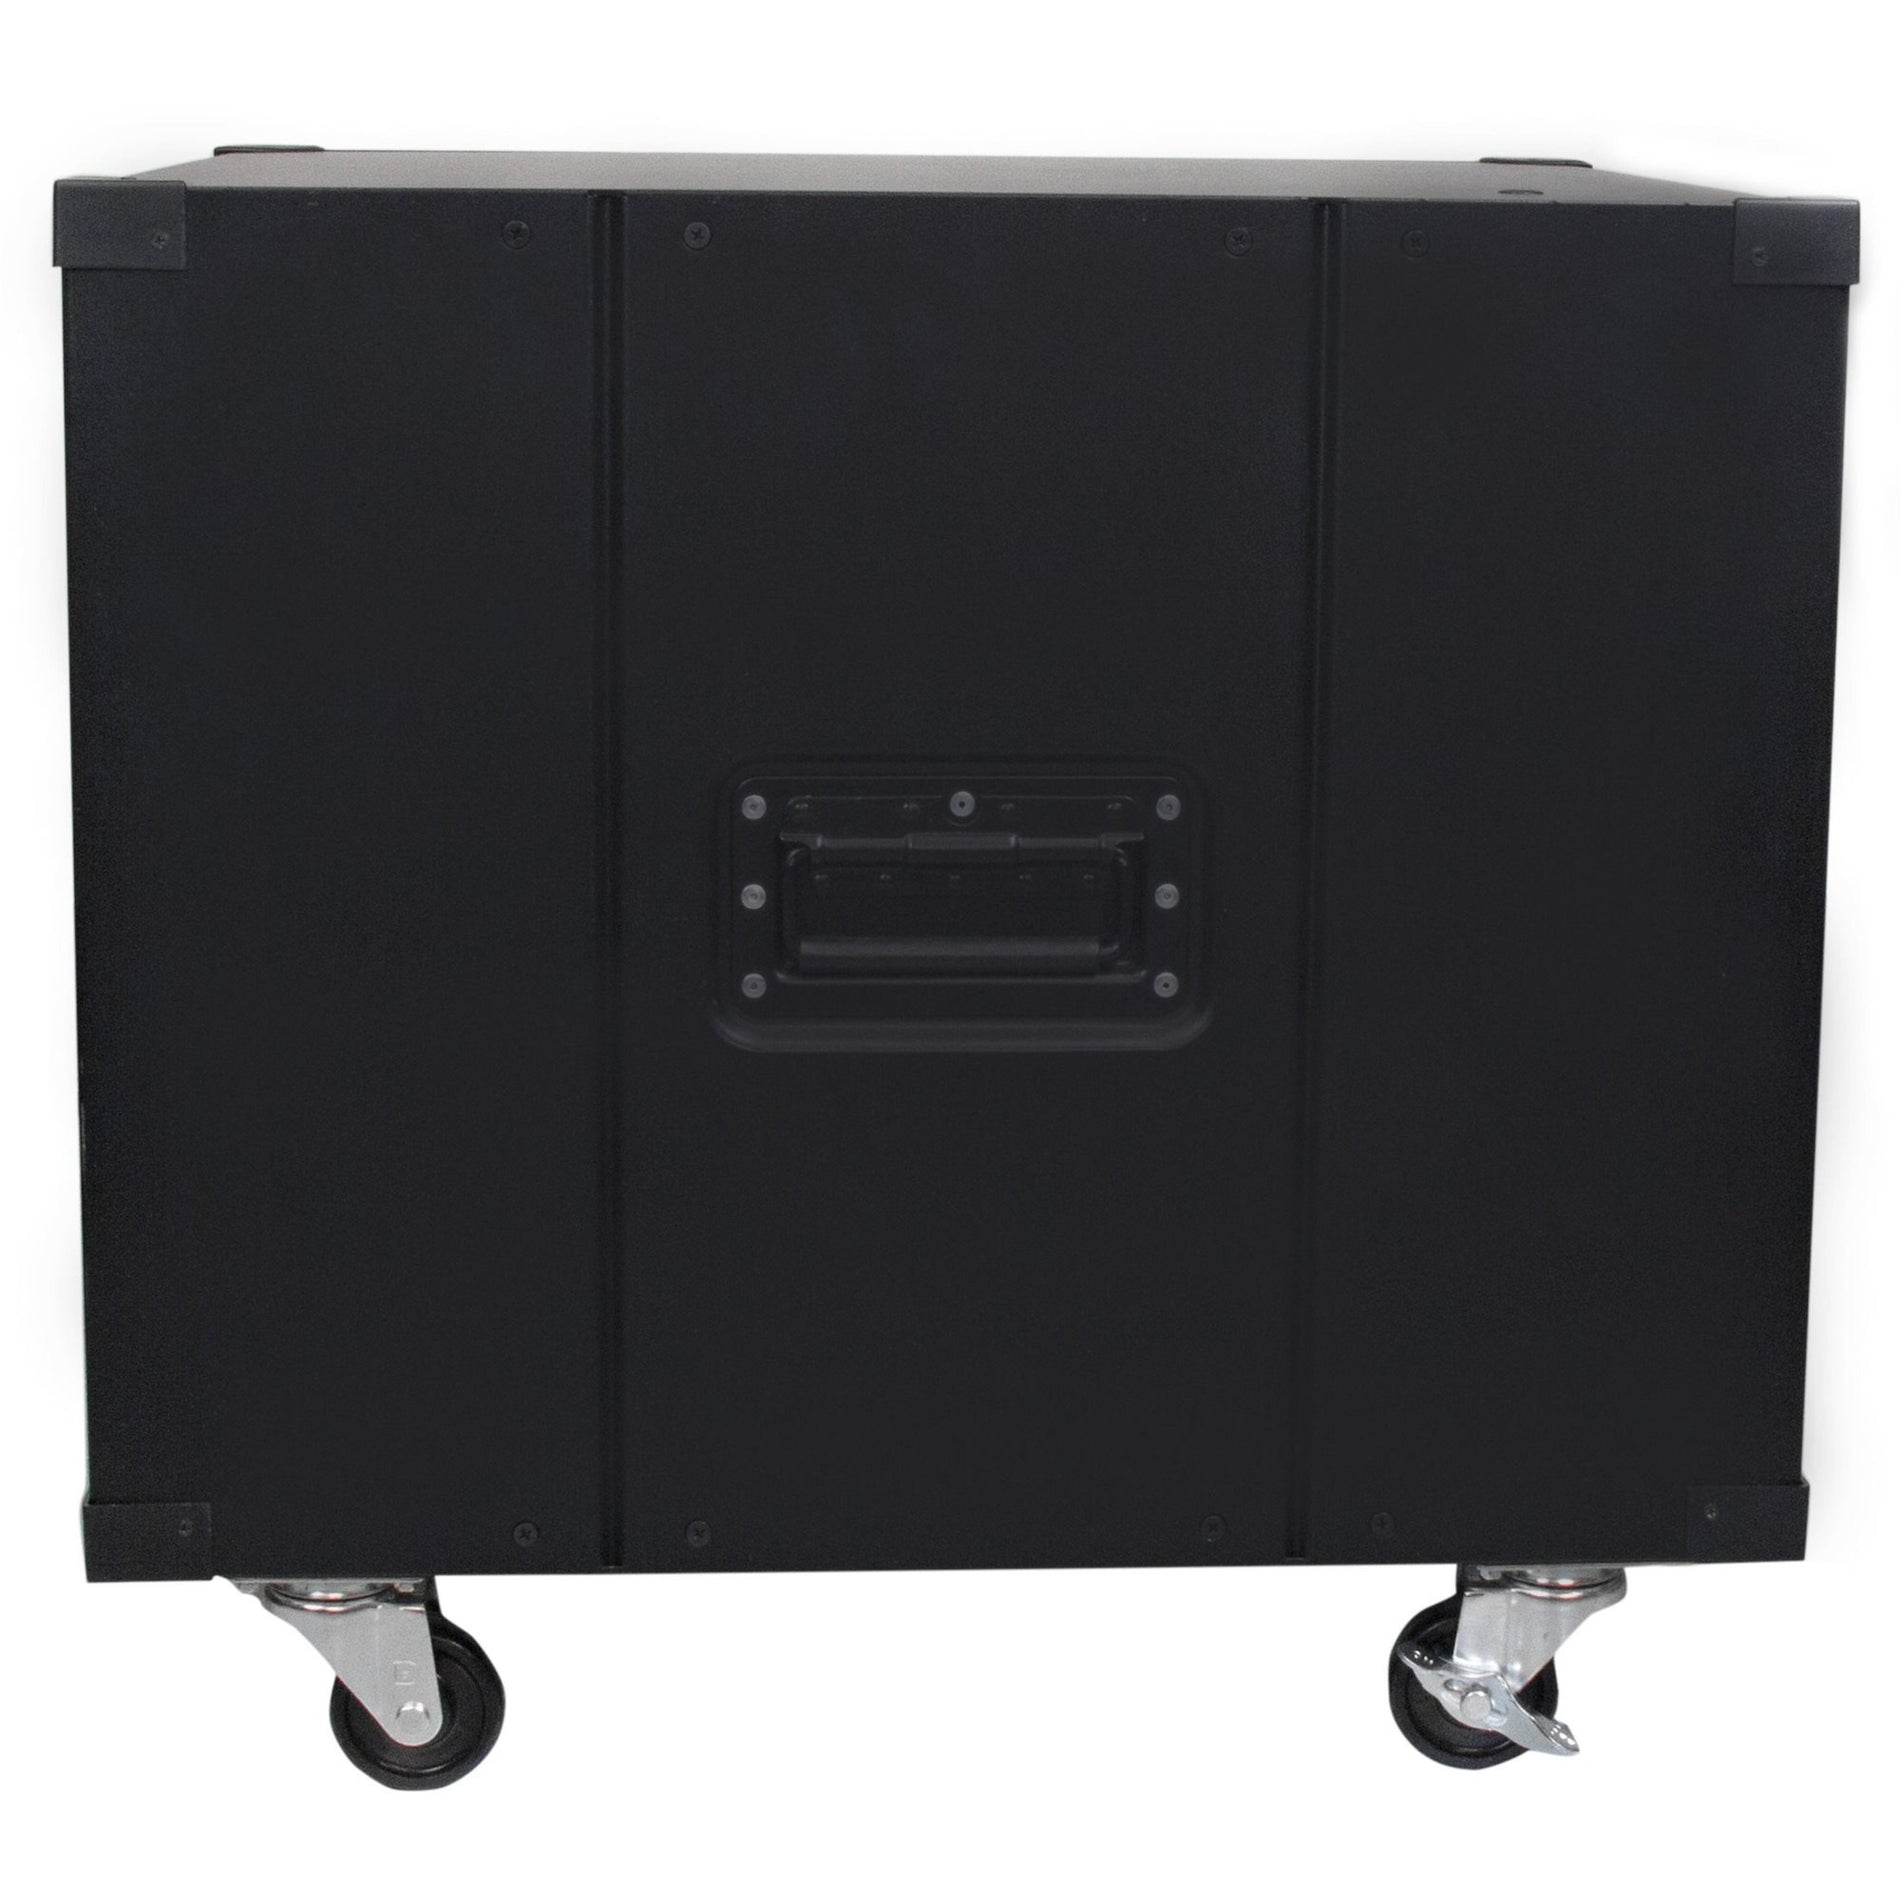 StarTech.com RK960CP Portable Server Rack with Handles - Rolling Cabinet - 9U, Easy Assembly, Casters, Black